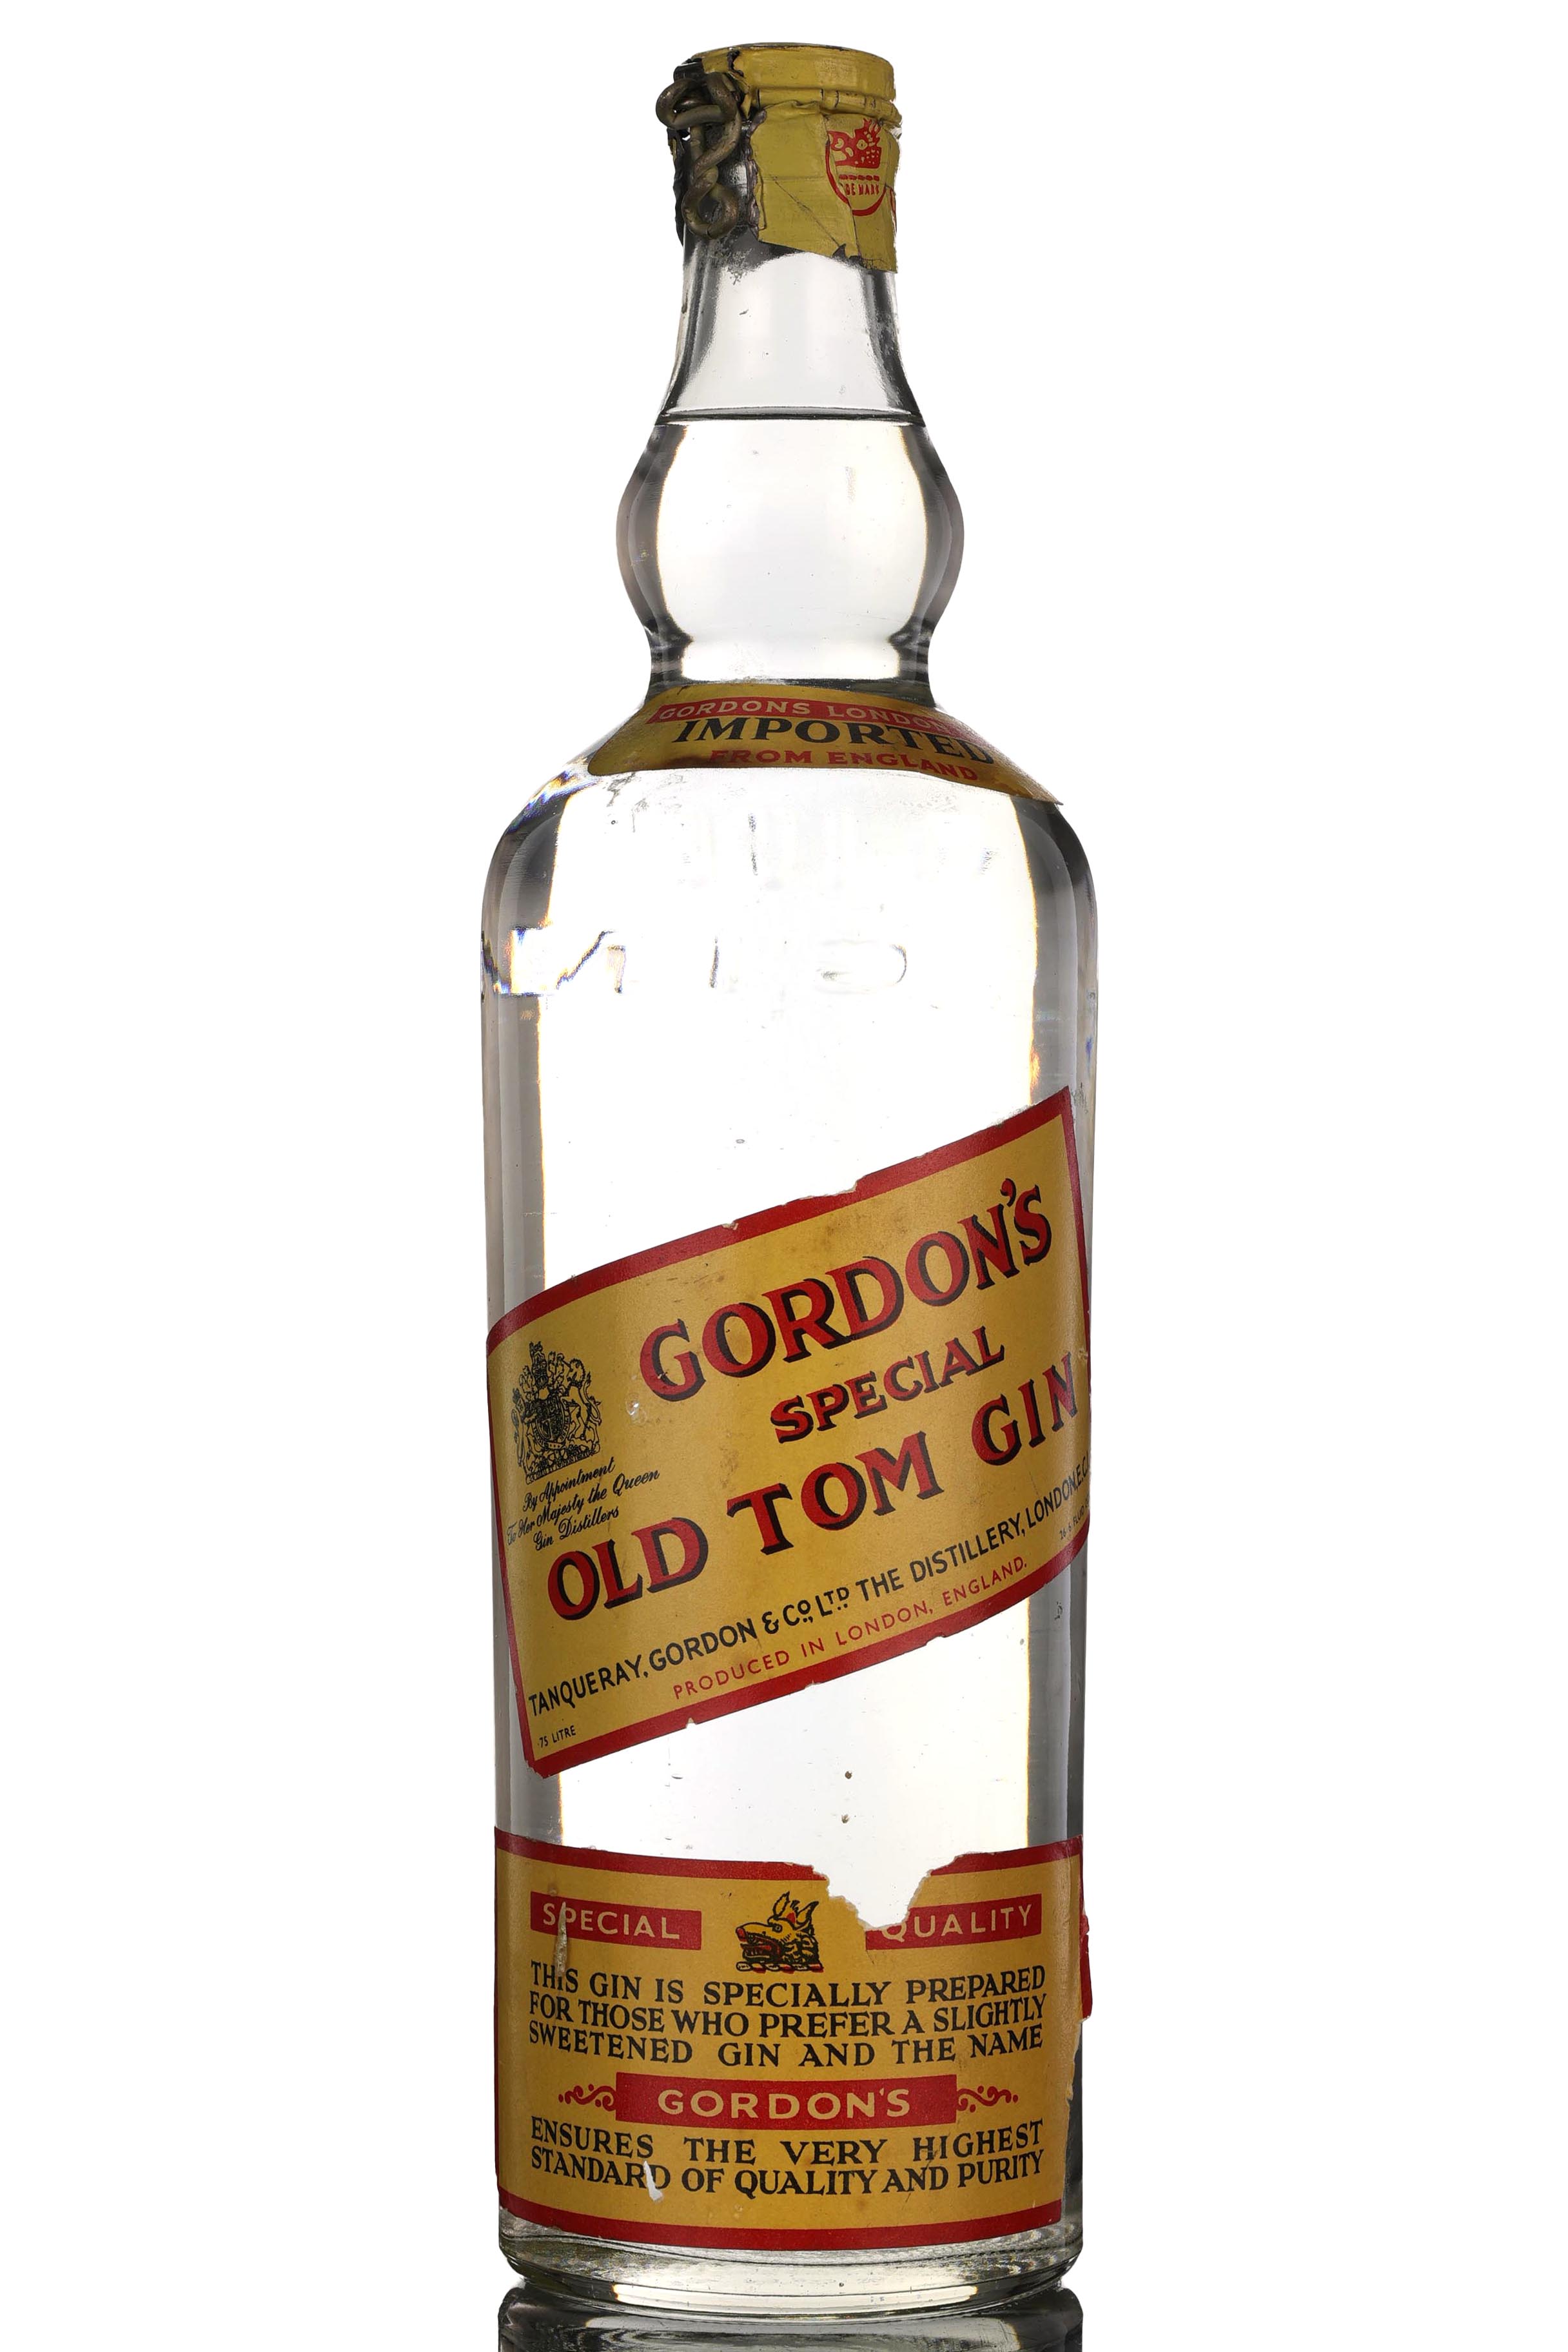 Gordons Special Old Tom Gin - 1950s